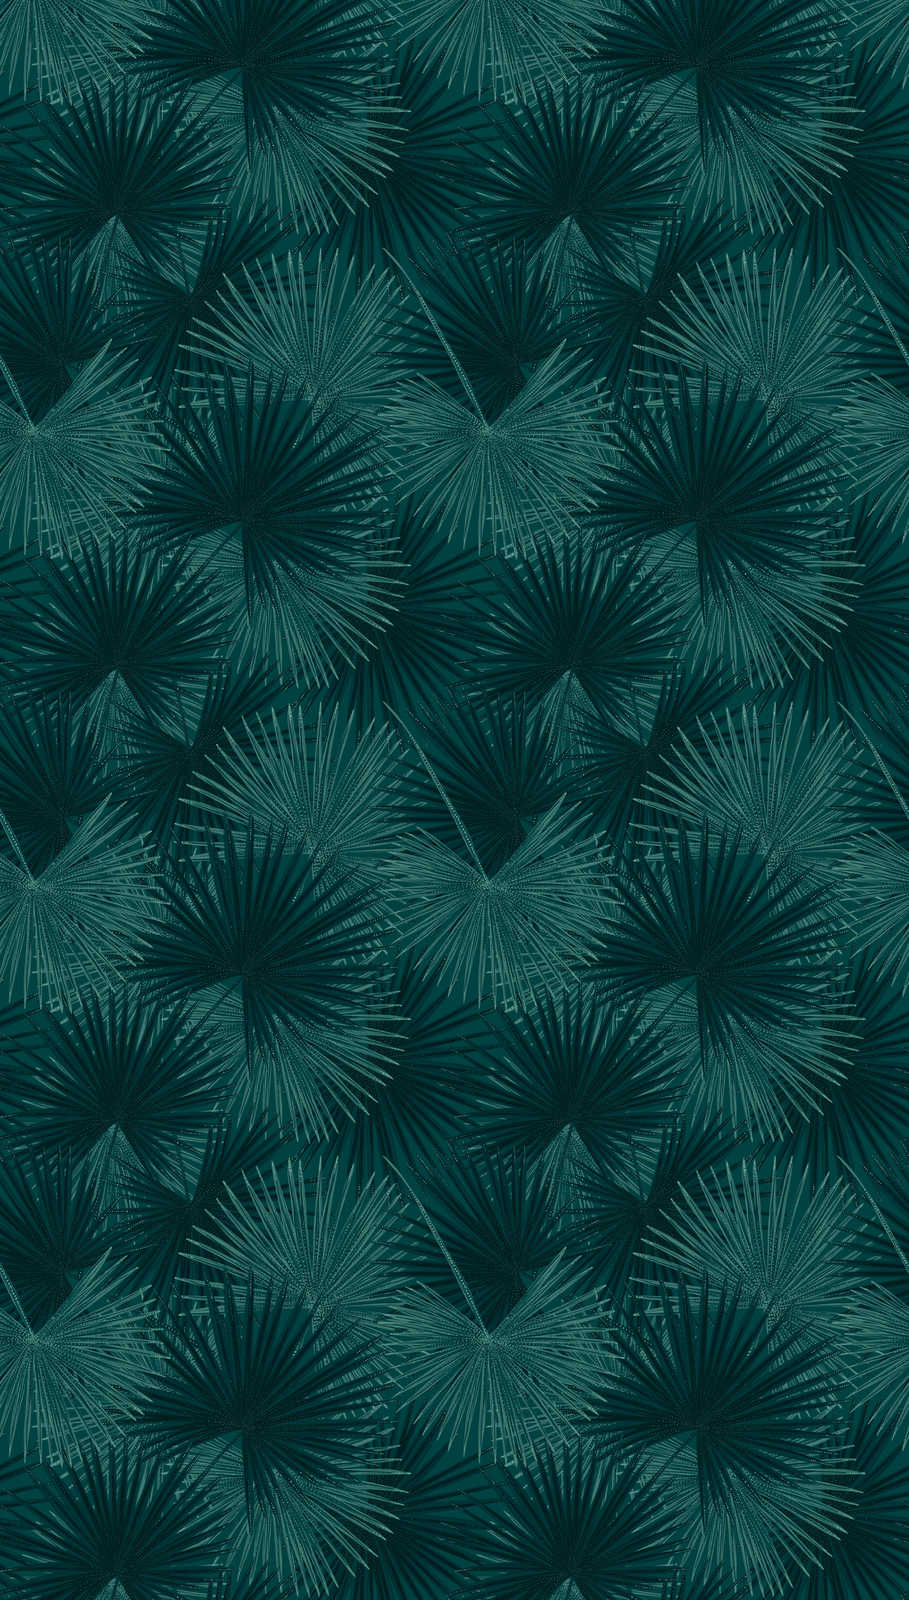             Leaf wallpaper with tropical plants - petrol
        